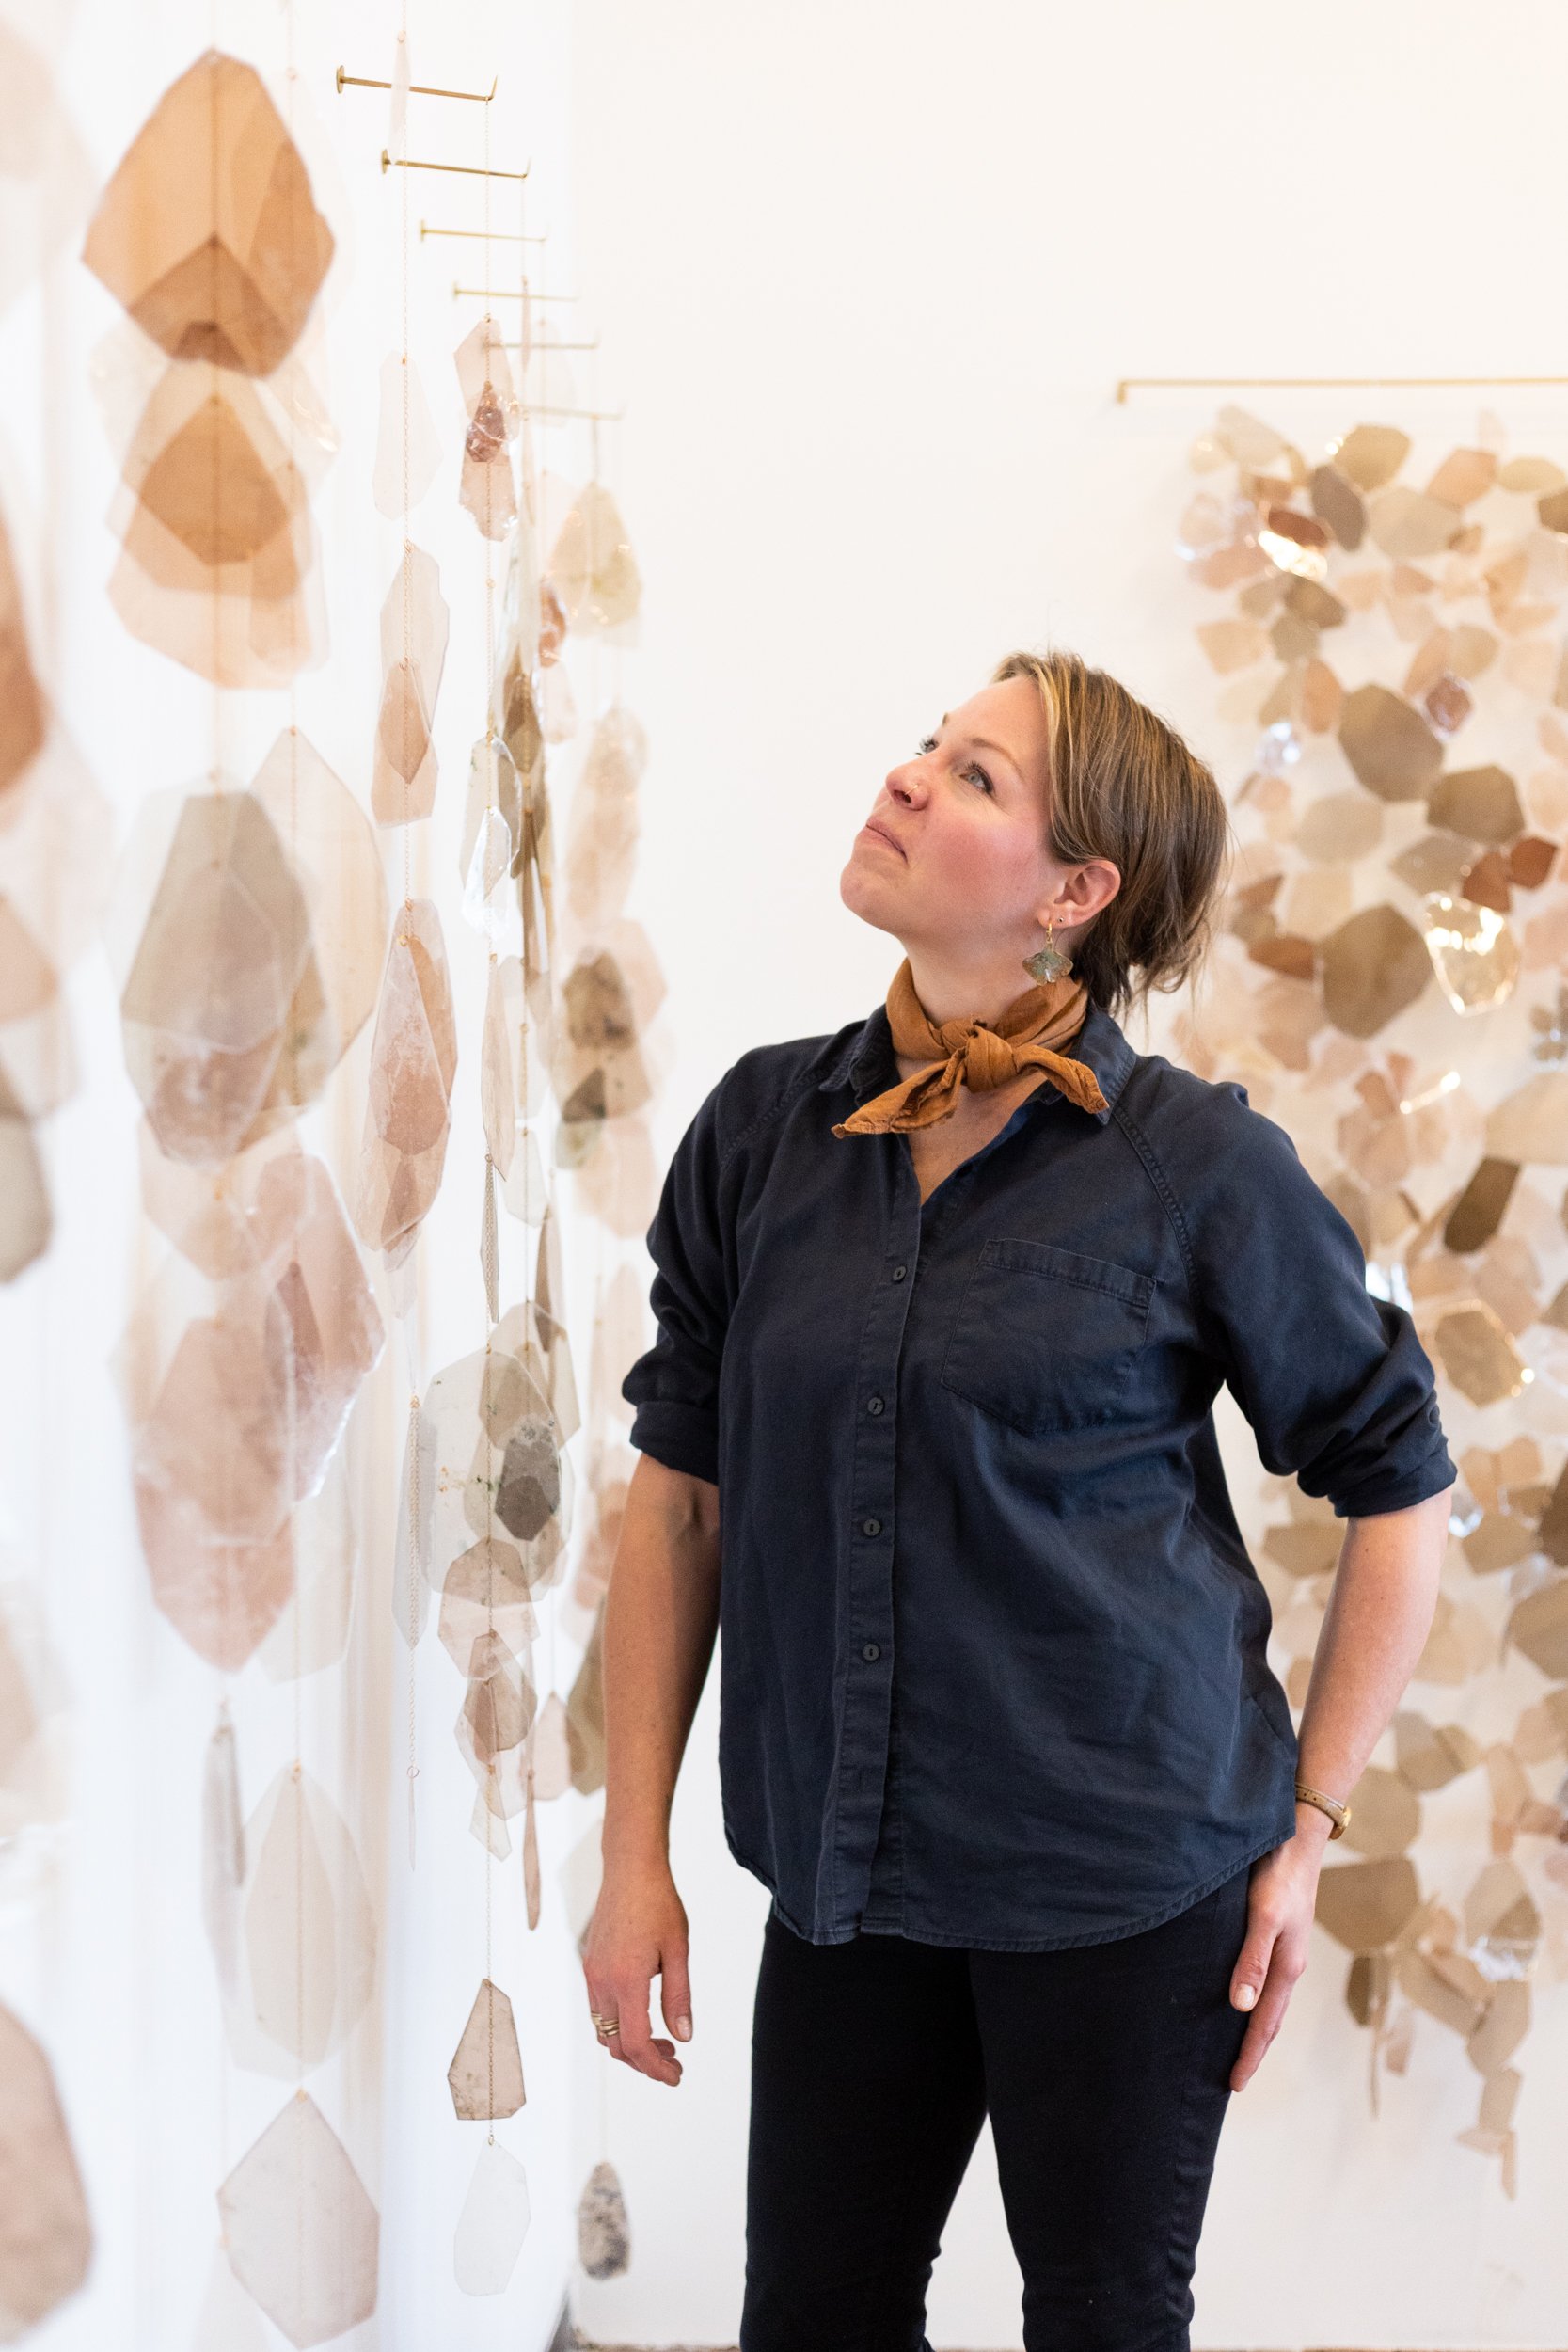  Explore &amp; collect original mixed media artwork utilizing natural and manmade materials by Maine-based installation artist, Christina Watka, 24/7 online at soapboxarts.com and in person at Soapbox Arts Gallery, a contemporary art gallery in Burli